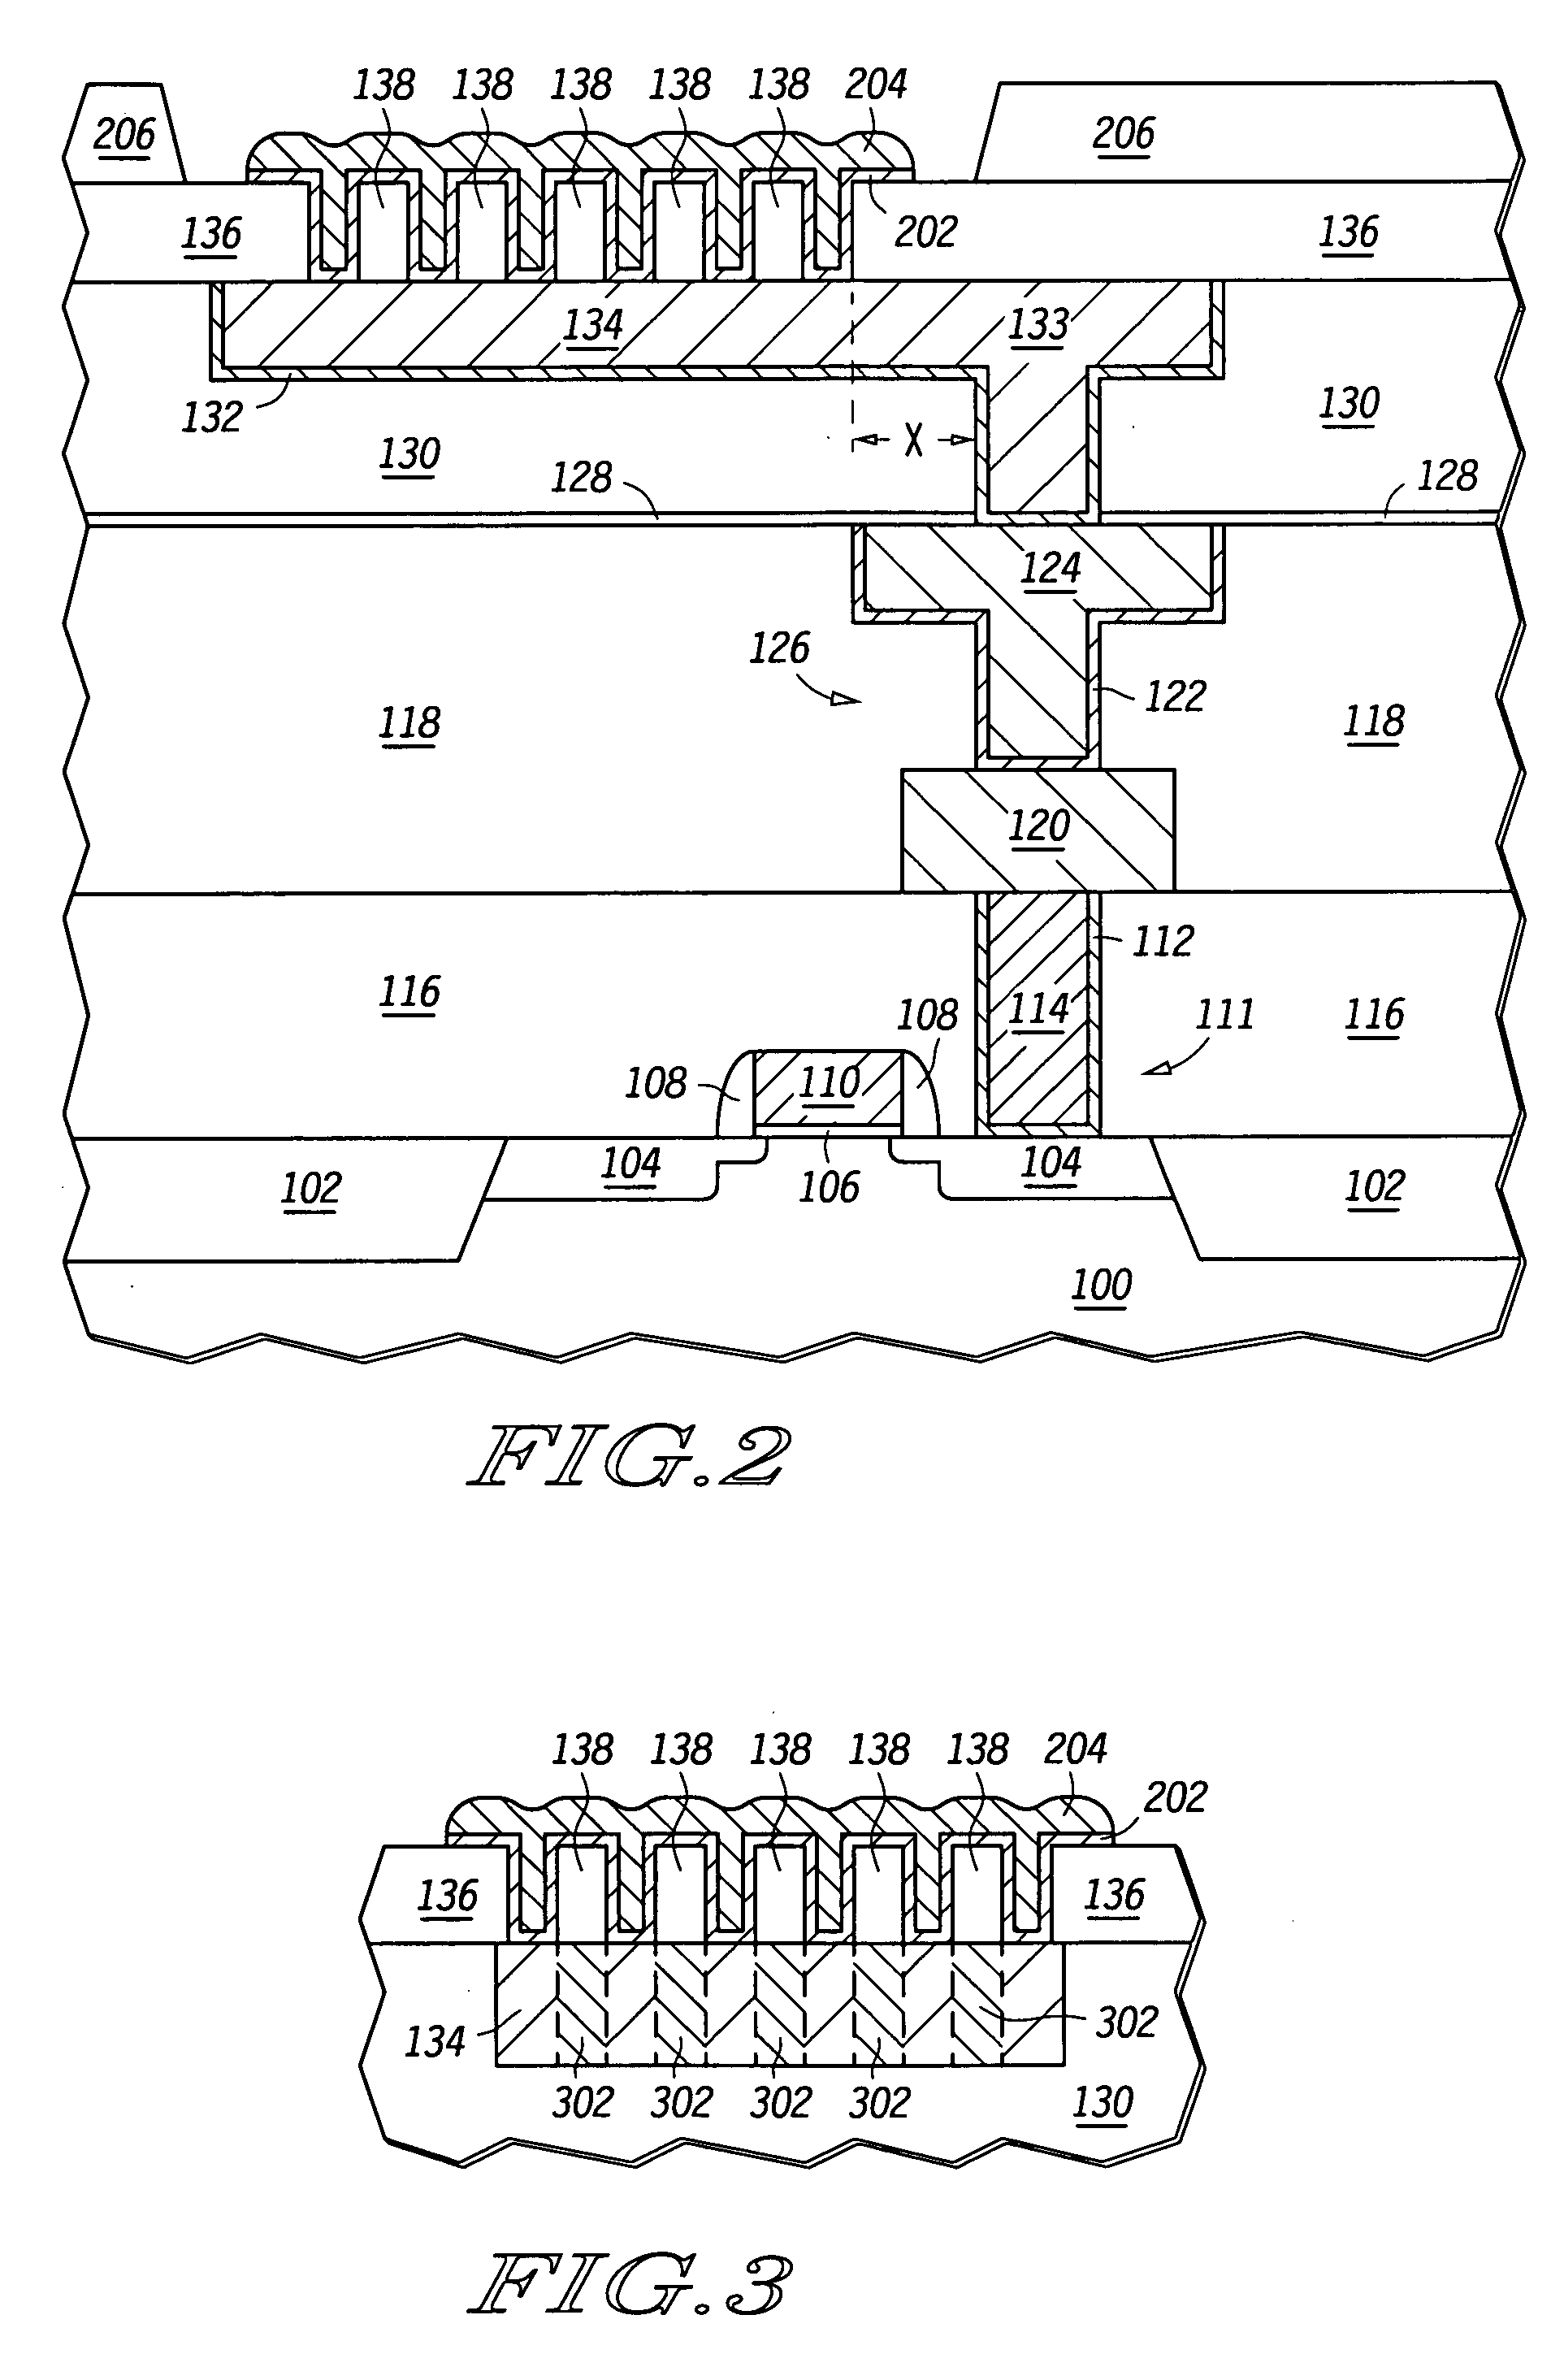 Method for forming a bond pad interface